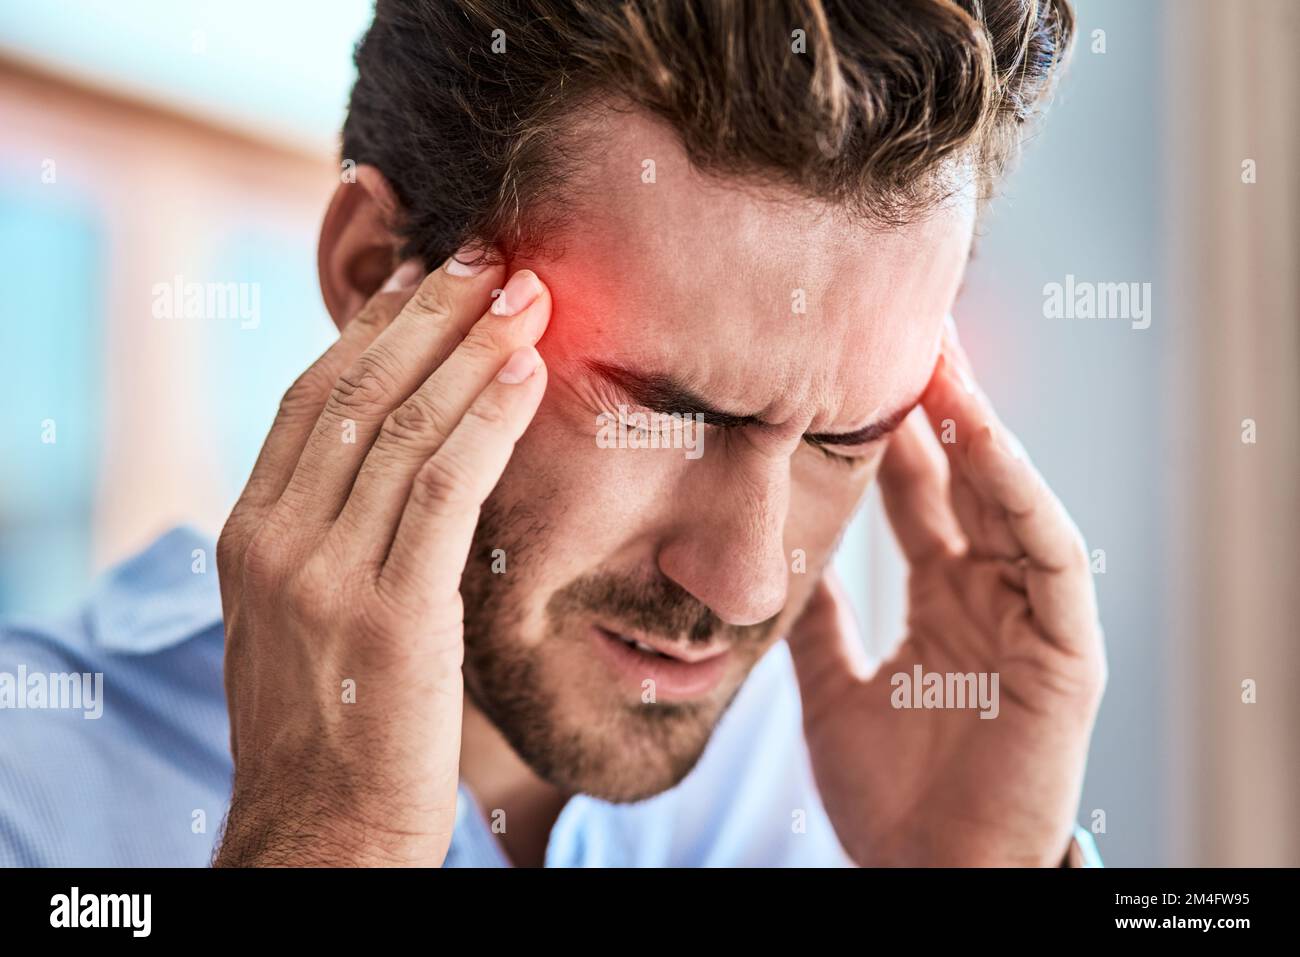 I need to take something for this headache. a uncomfortable looking man holding his head in discomfort due to pain at home during the day. Stock Photo